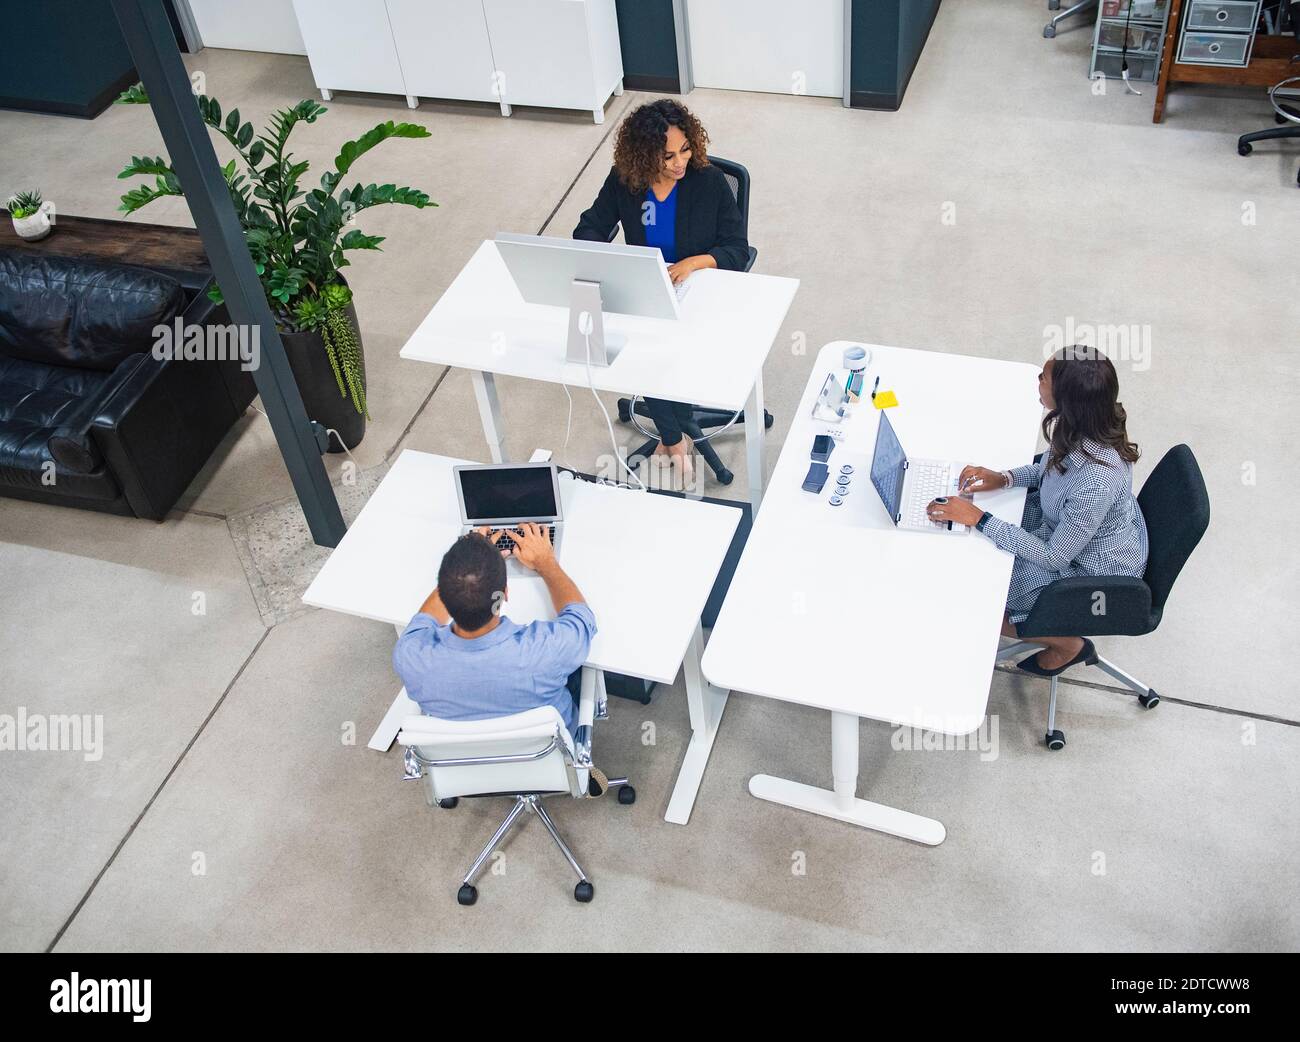 People working in office Stock Photo